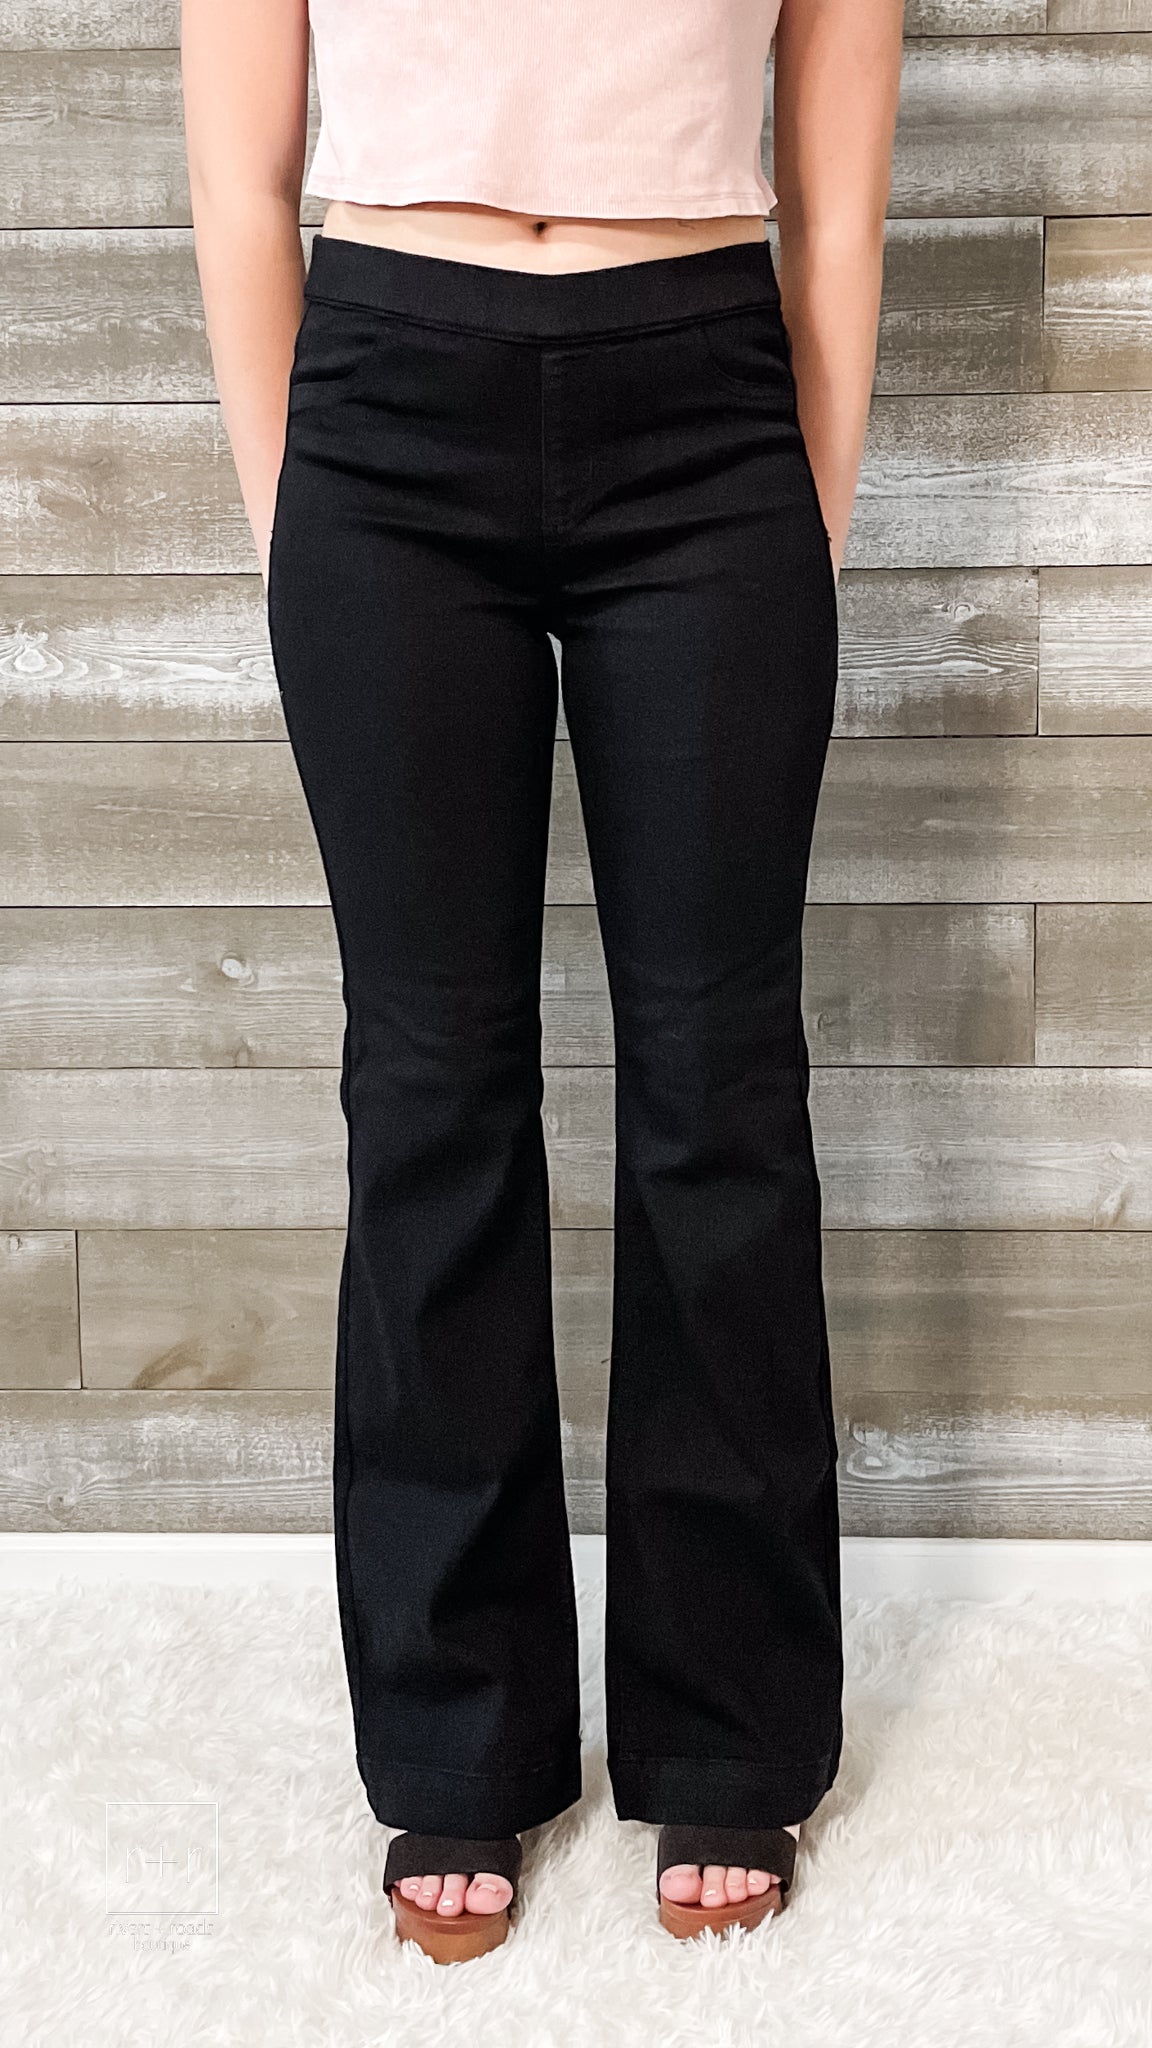 cello jeans mid rise pull on flared jegging in black AB35173